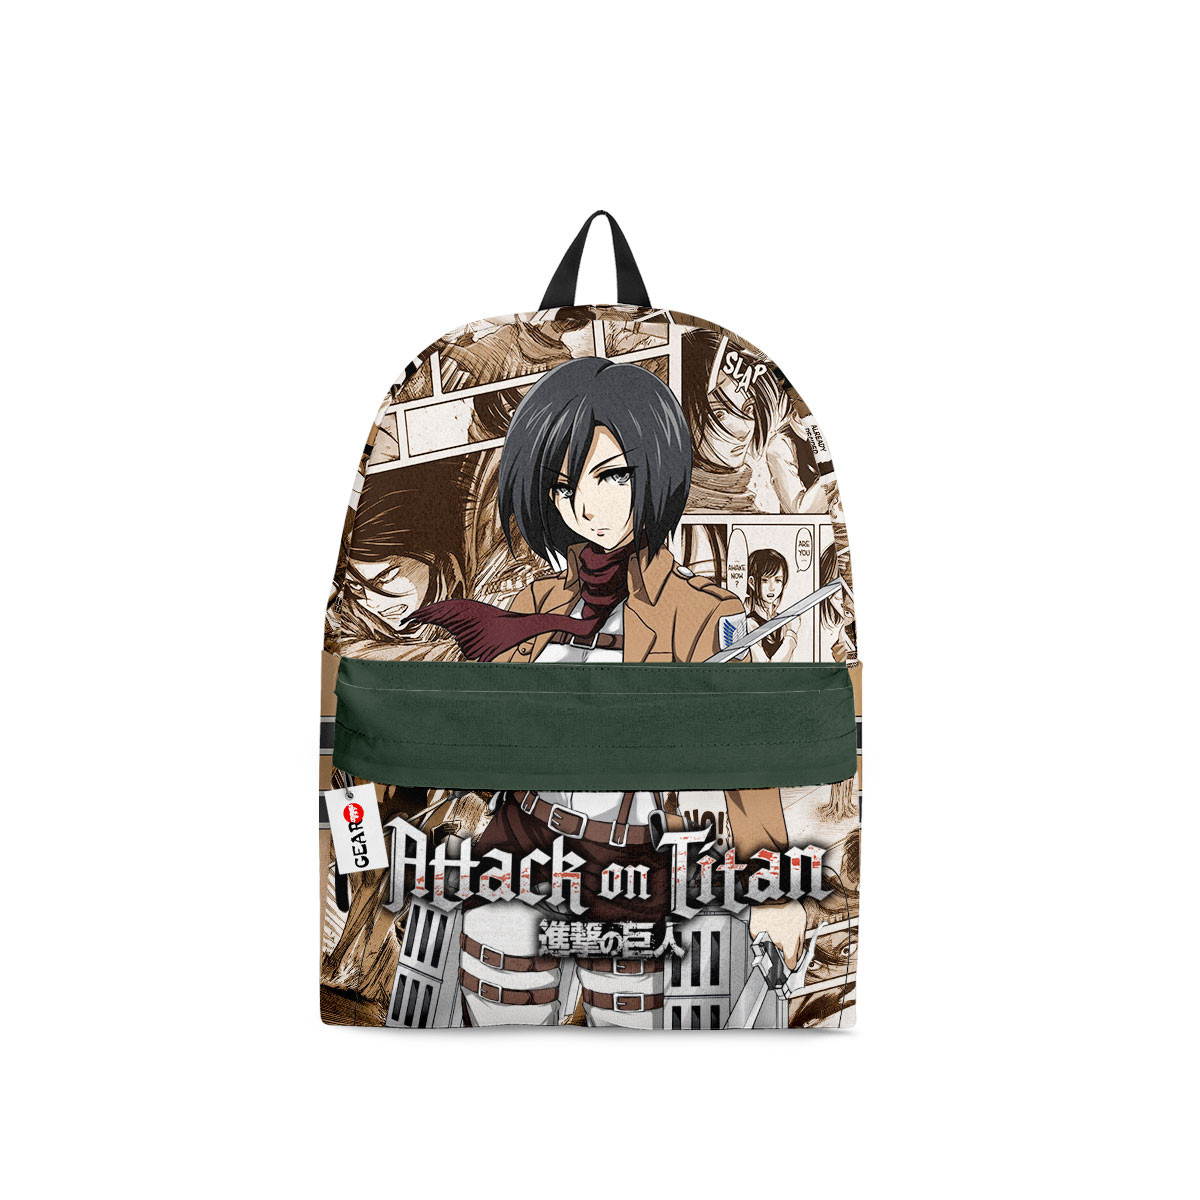 Latest Anime style products 262